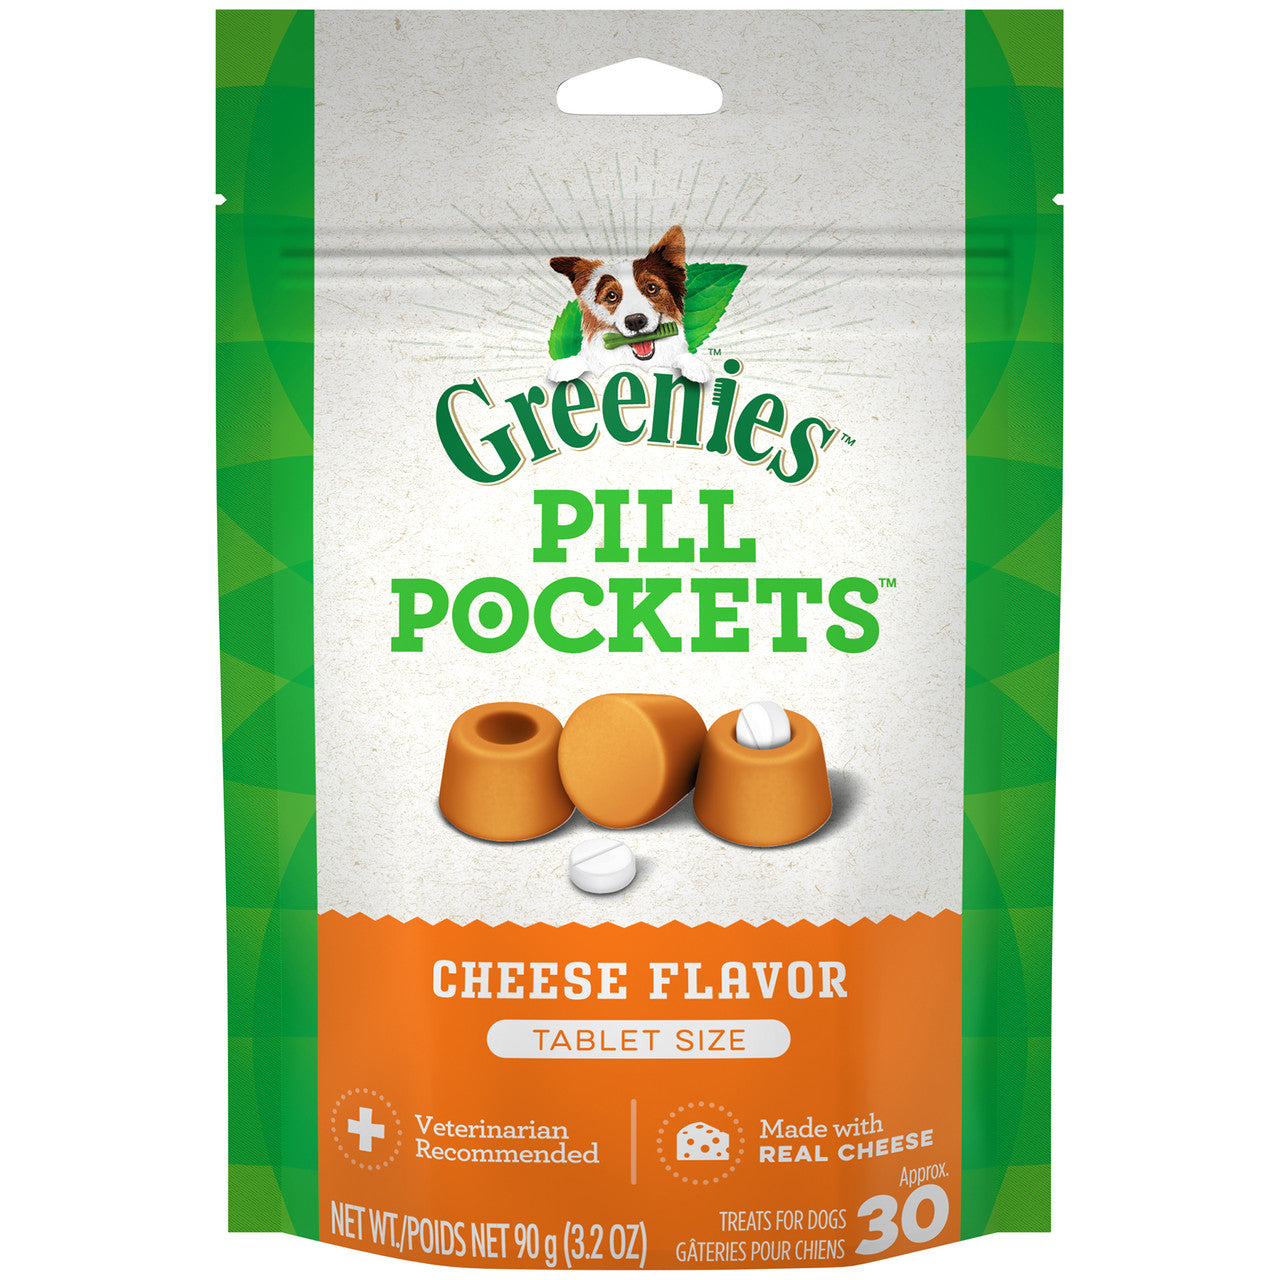 Greenies Pill Pockets for Tablets Cheese 30 Count 3.2 oz